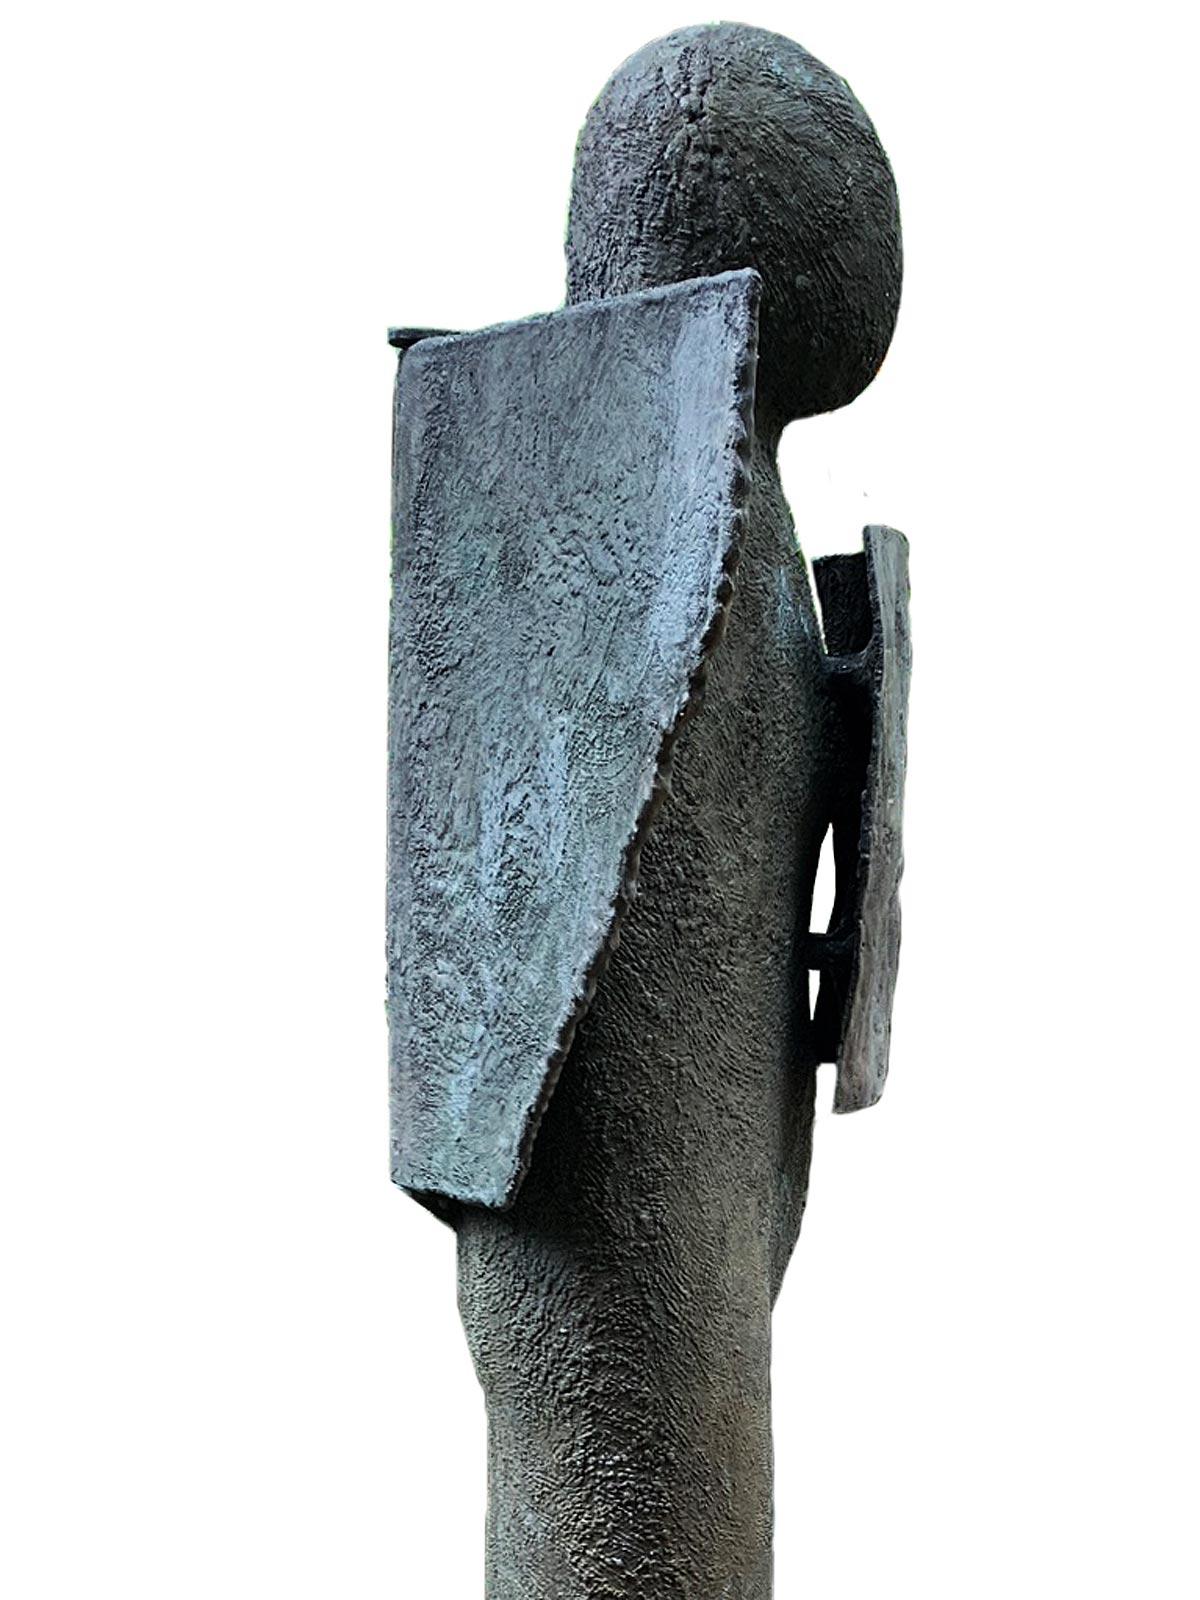 Moonwatcher - Contemporary Sculpture by Jim Amaral